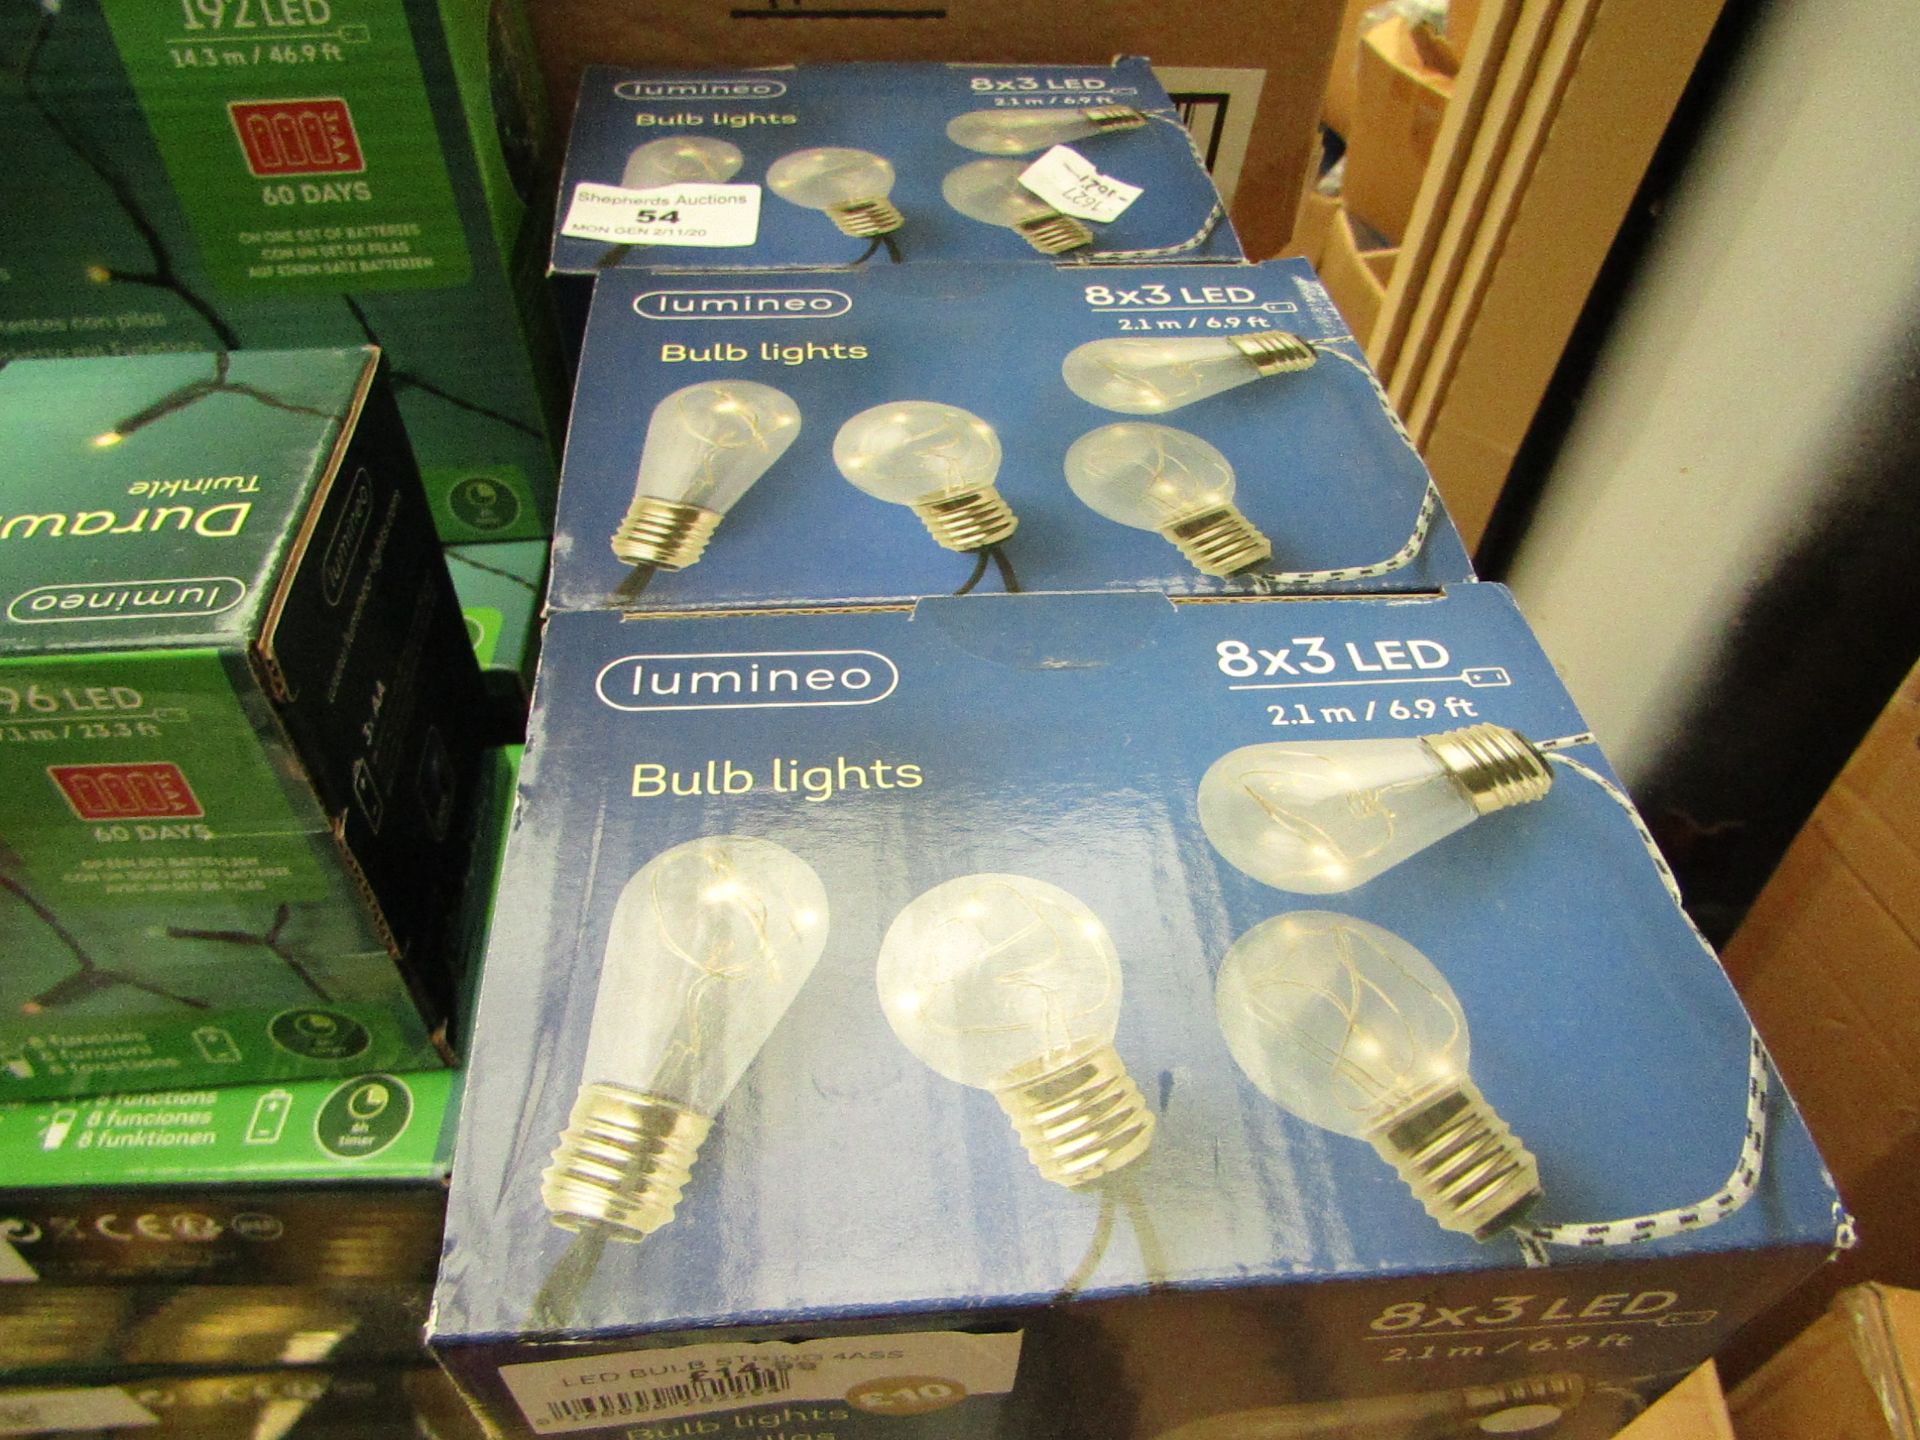 6x Lumineo - String Bulb Lights 8x3 LED 6.9Ft - (Battery Operated) - All Boxed.